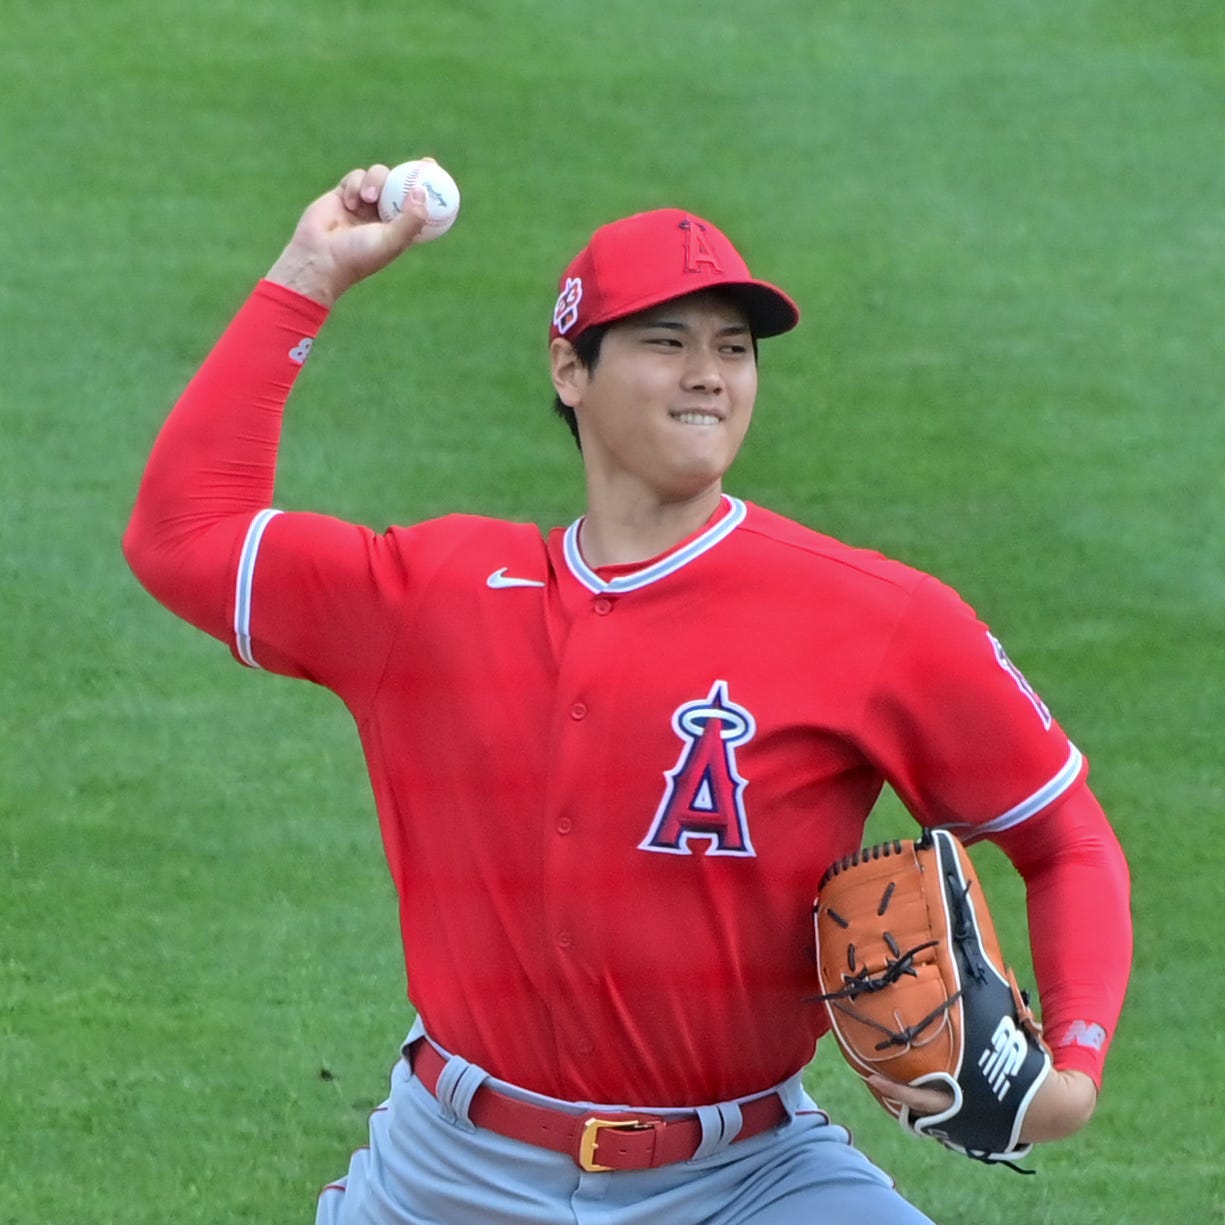 Angels starting pitcher Shohei Ohtani led Japan to the WBC title this spring.